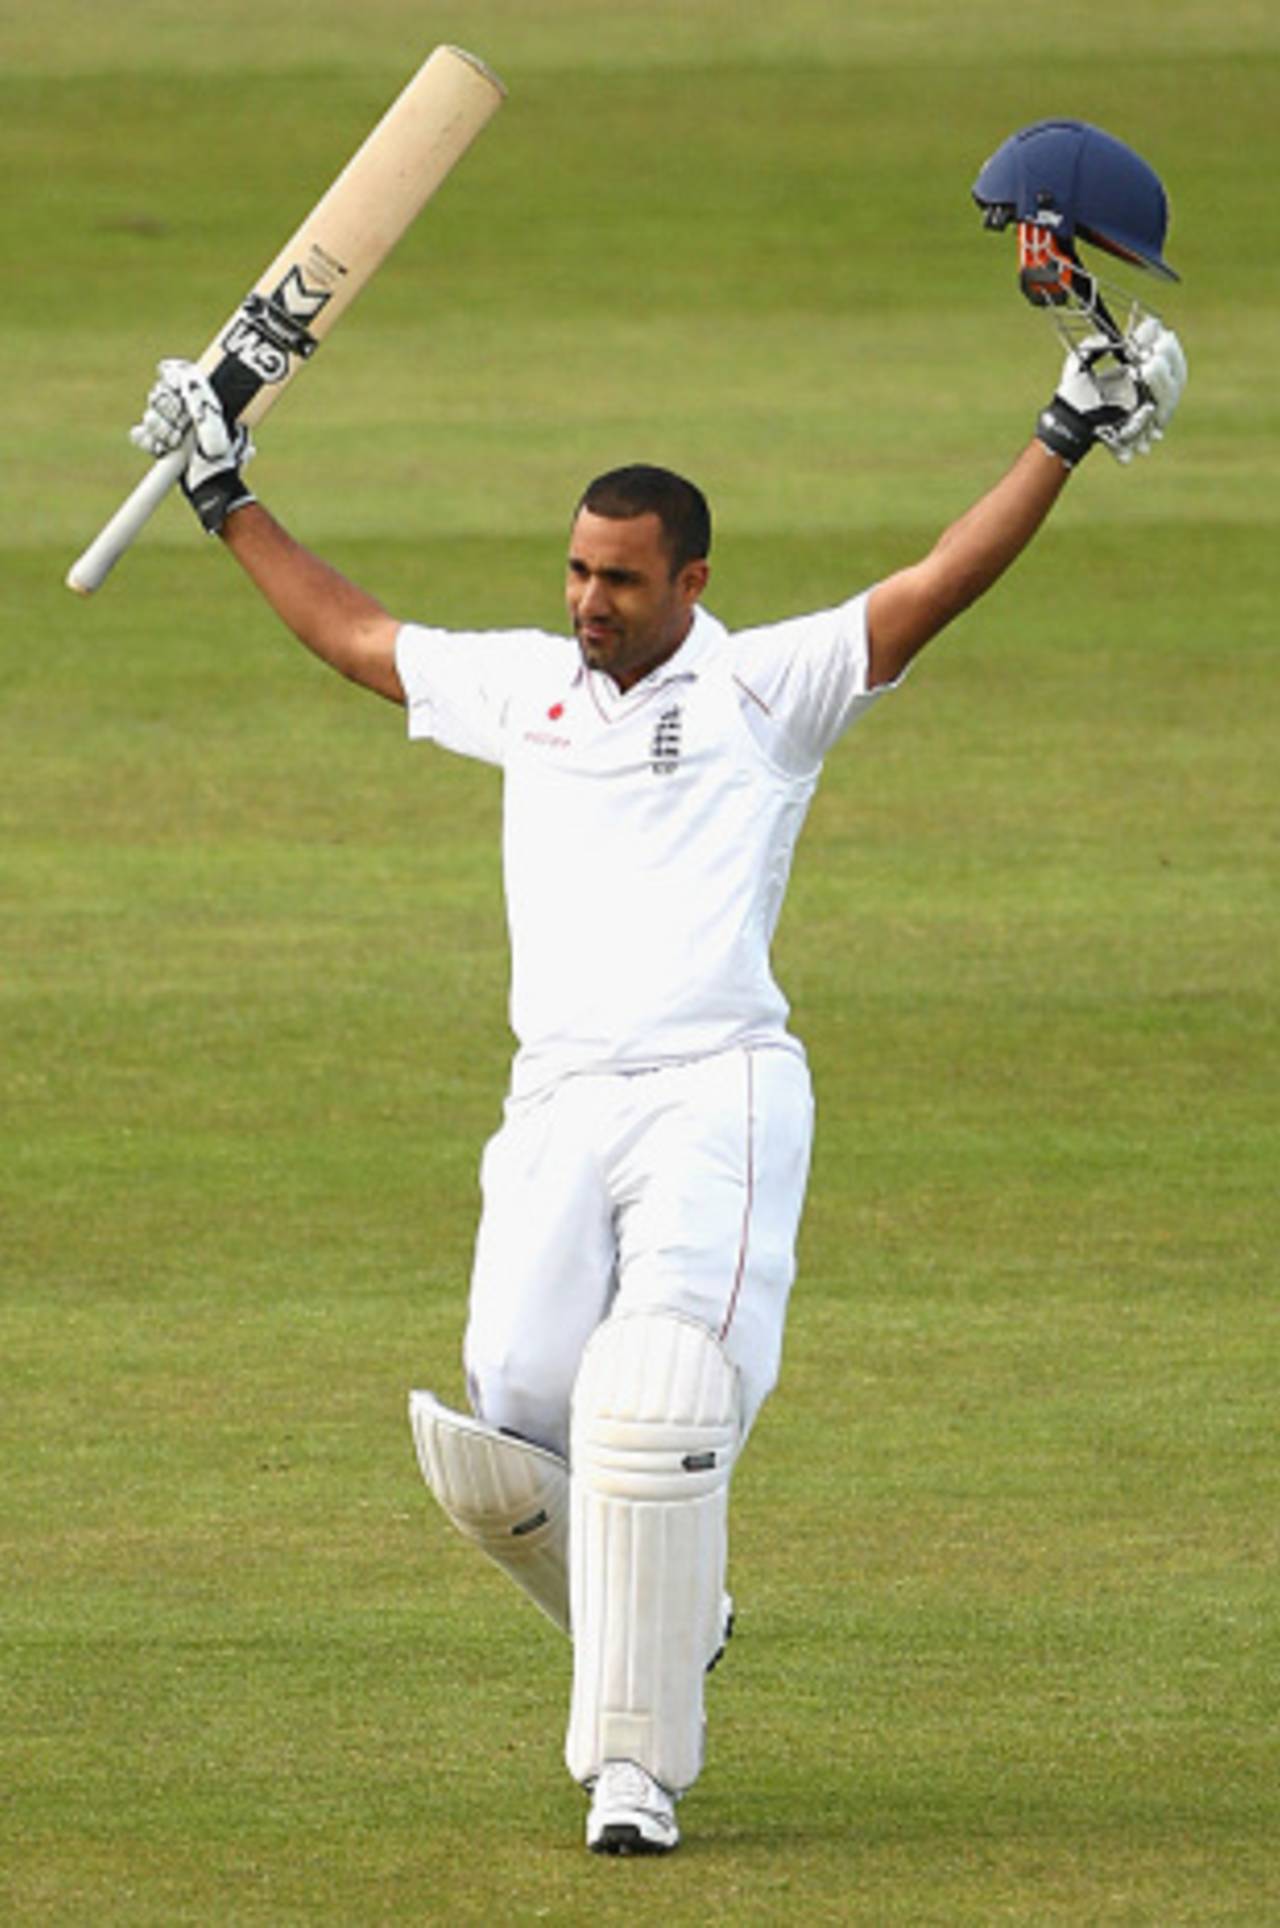 Ravi Bopara lofts his arms on reaching his third successive Test hundred, England v West Indies, 2nd Test, Chester-le-Street, May 14, 2009